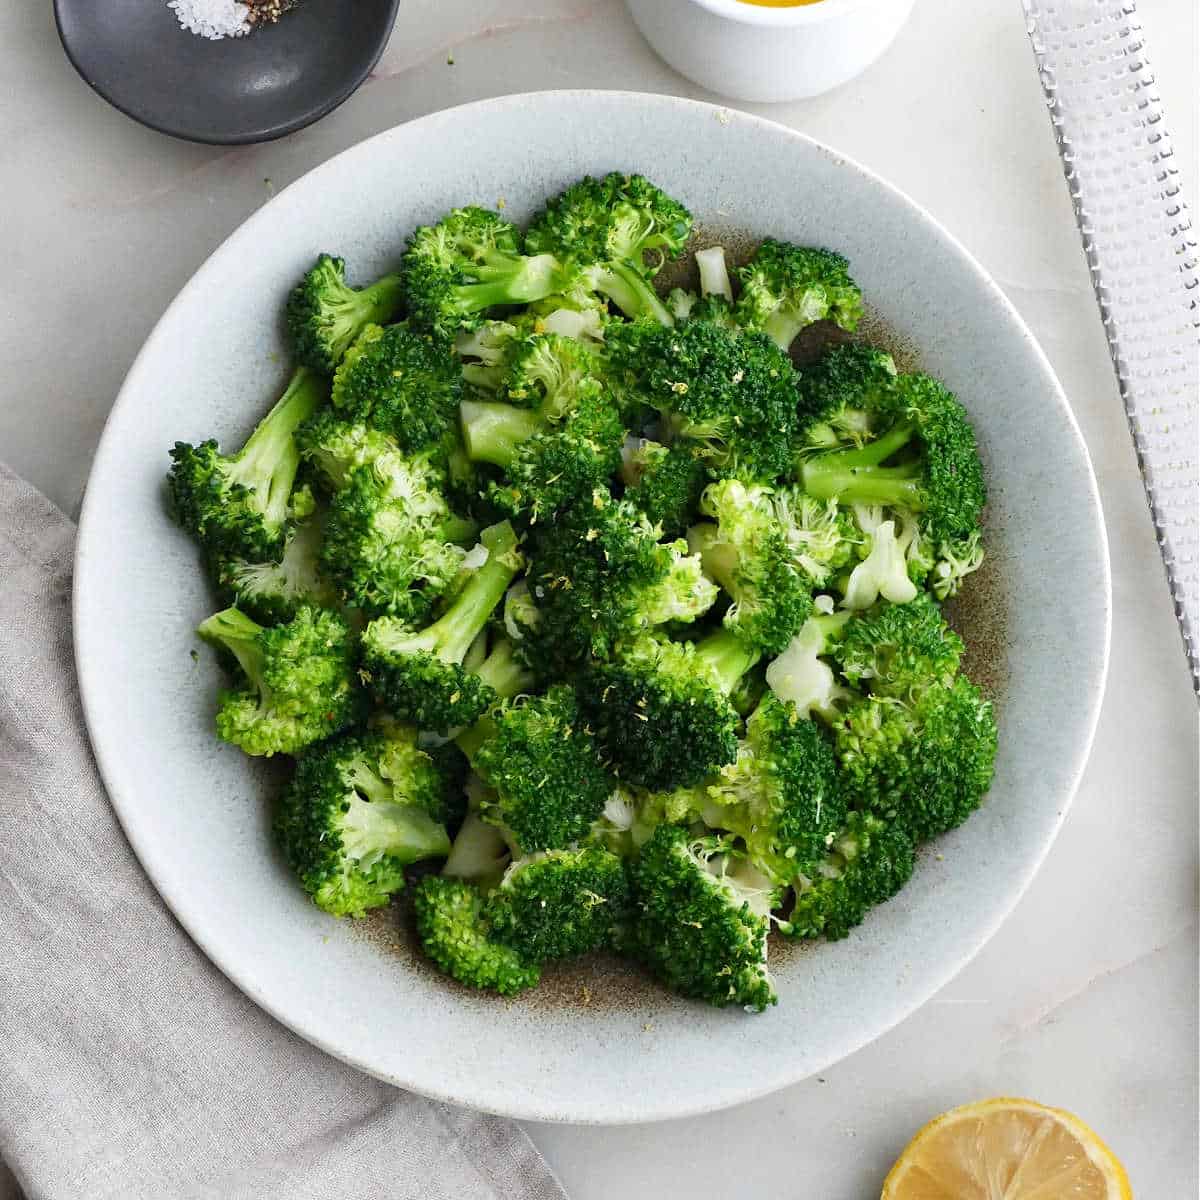 Broccoli Health Benefits, Nutrition Facts, and Recipes to Try